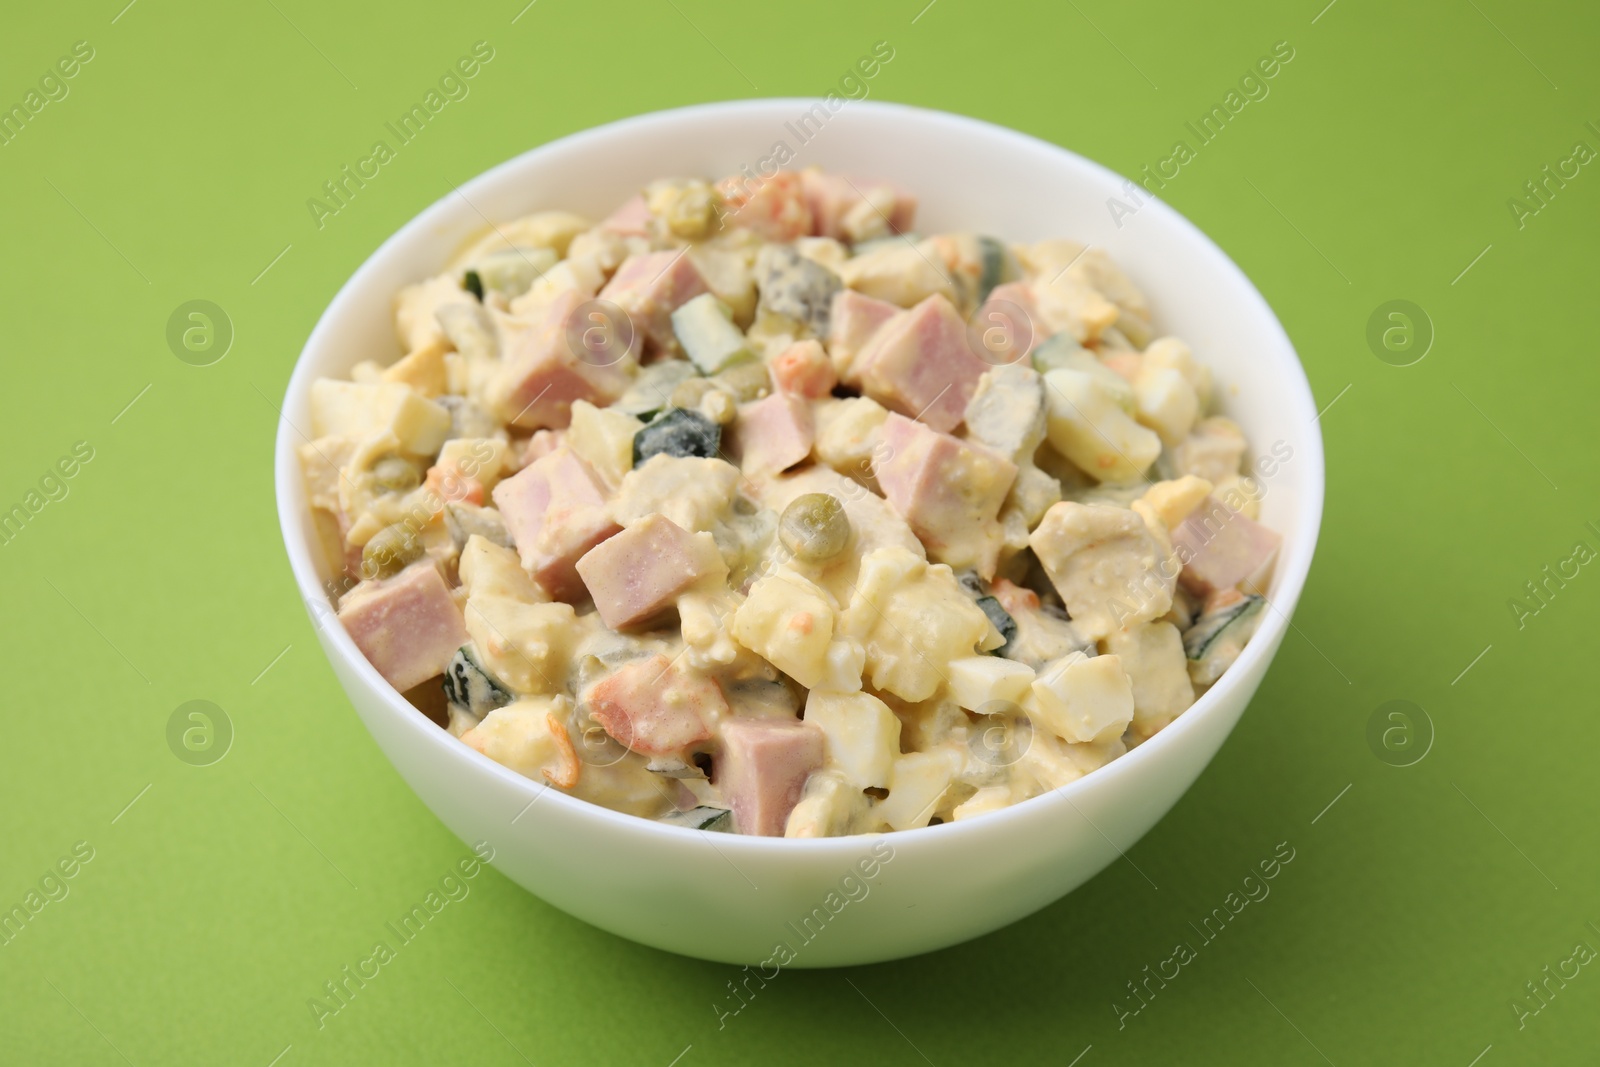 Photo of Tasty Olivier salad with boiled sausage in bowl on green table